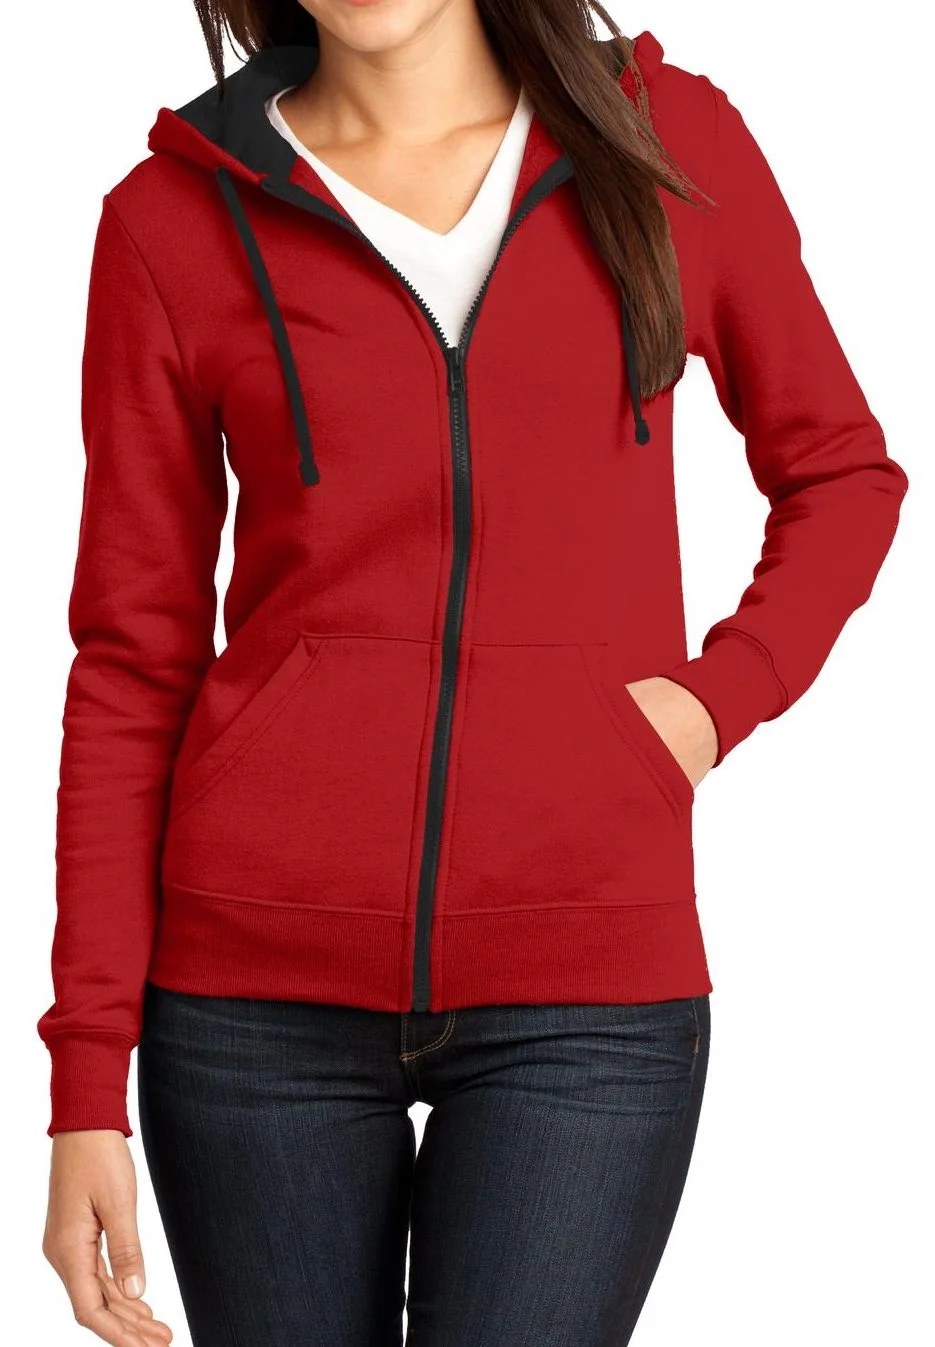 Hooded Sweatshirts - Bangladesh Factory, Suppliers, Manufacturers